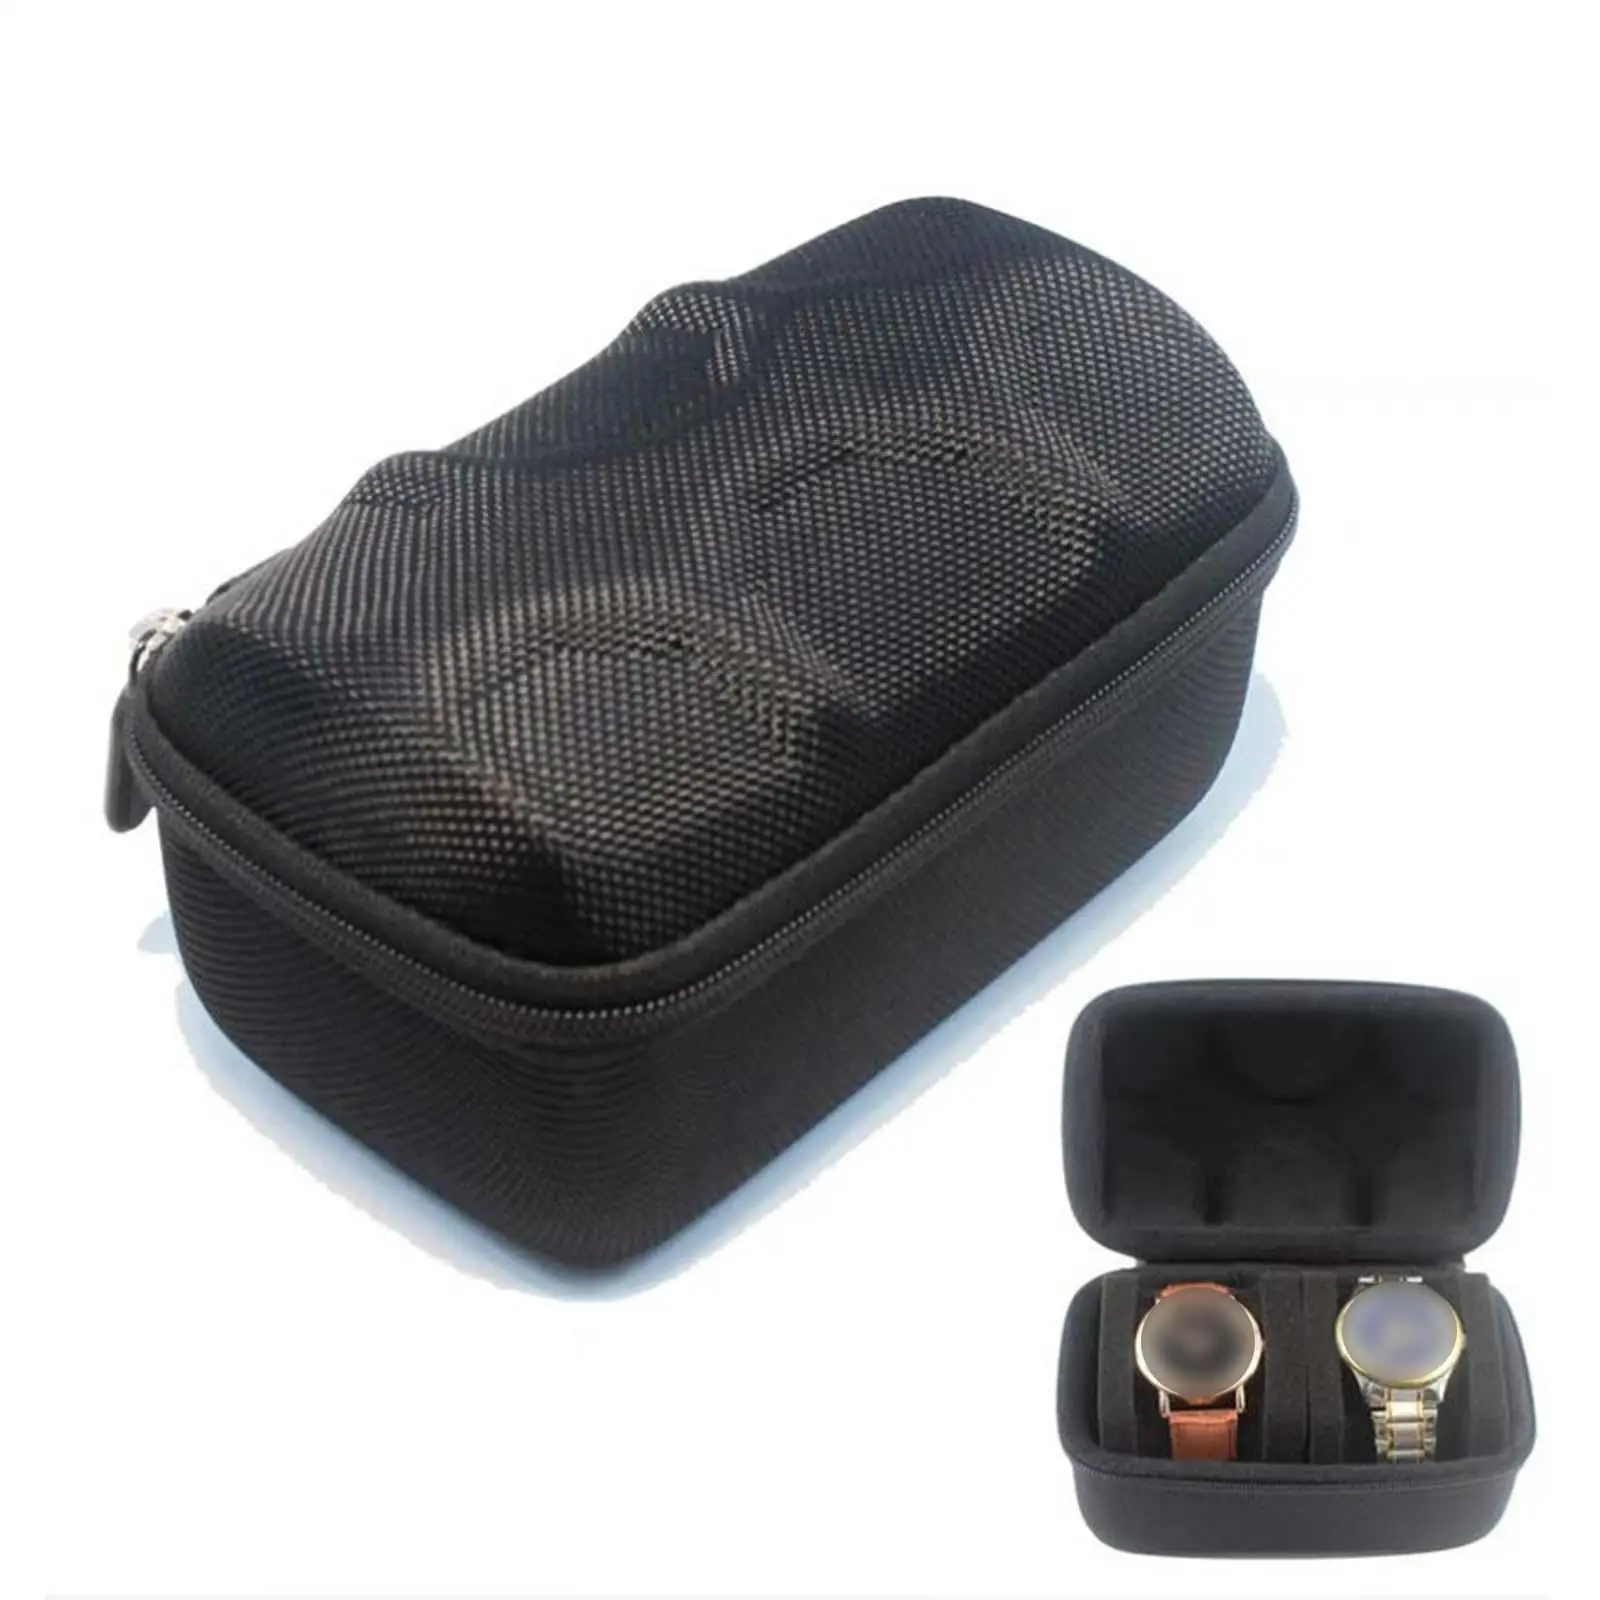 Outdoor 2Slot Watch Travel Case EVA Hard Shell Wristwatch Pouch Protection Organizer Ties Display Zipper Case with Handle Black